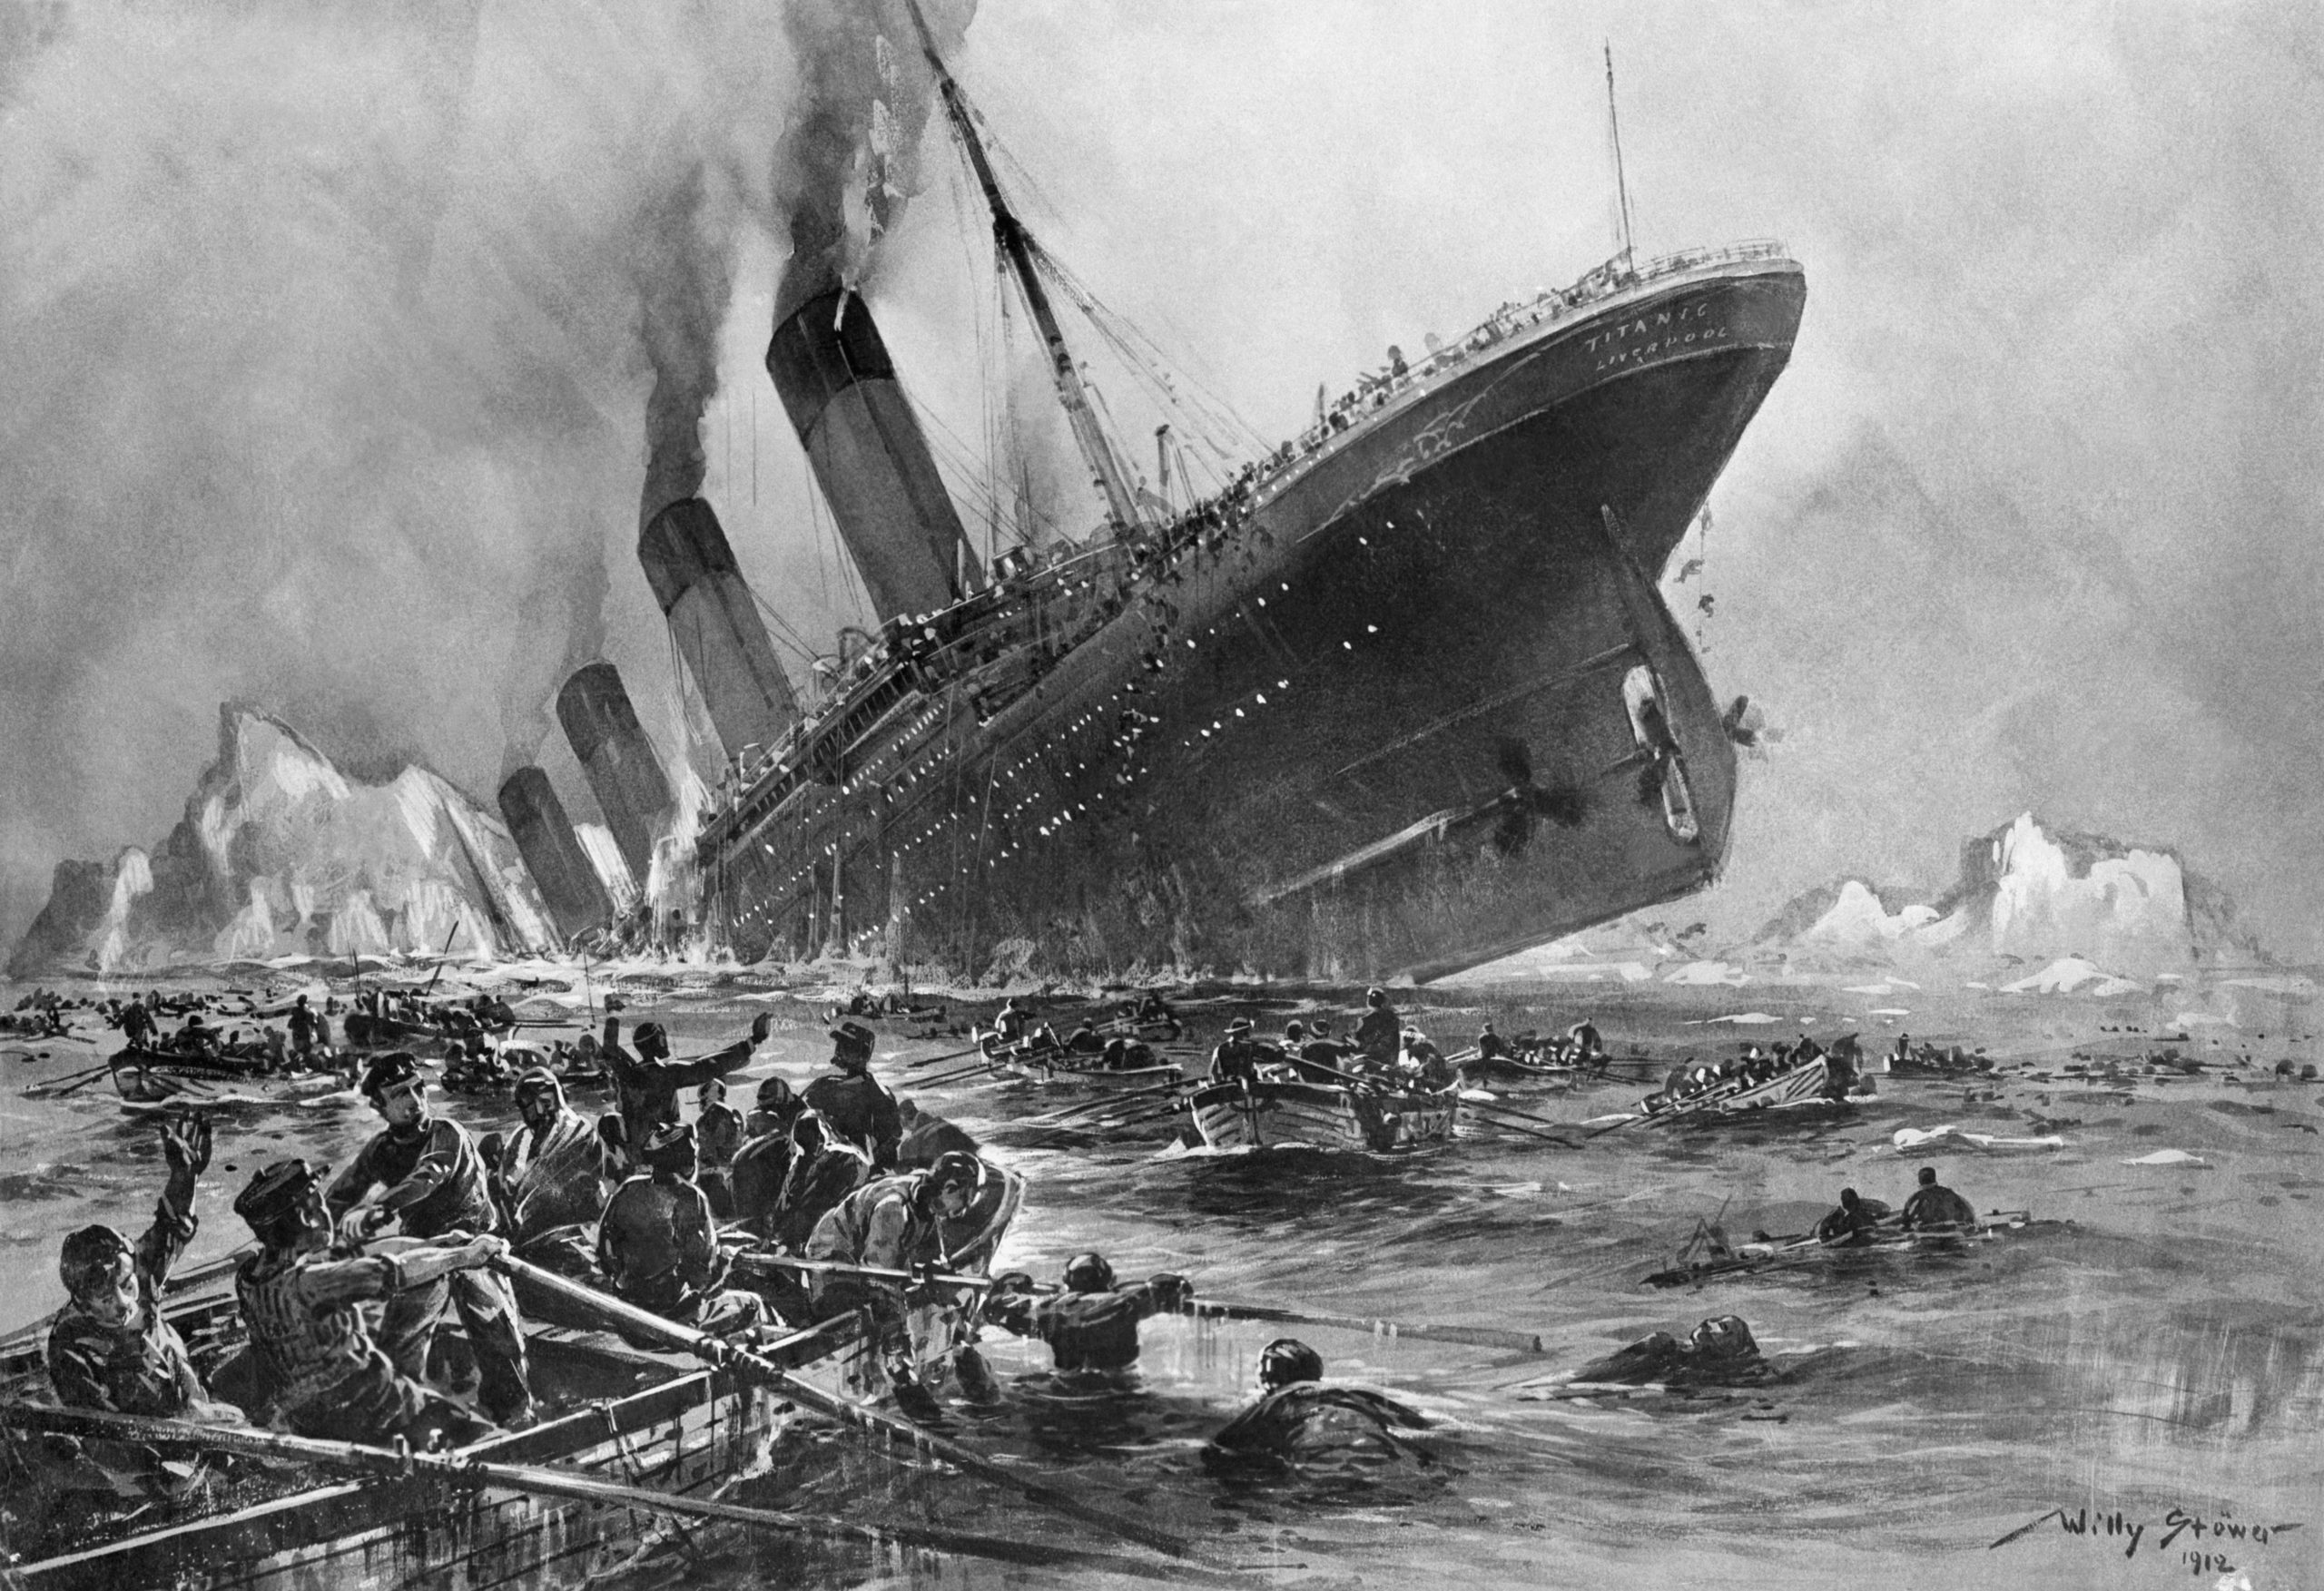 The sinking of the Titanic, painted by German artist Willy Stoewer. Photo Credit: Bettmann / Getty Images